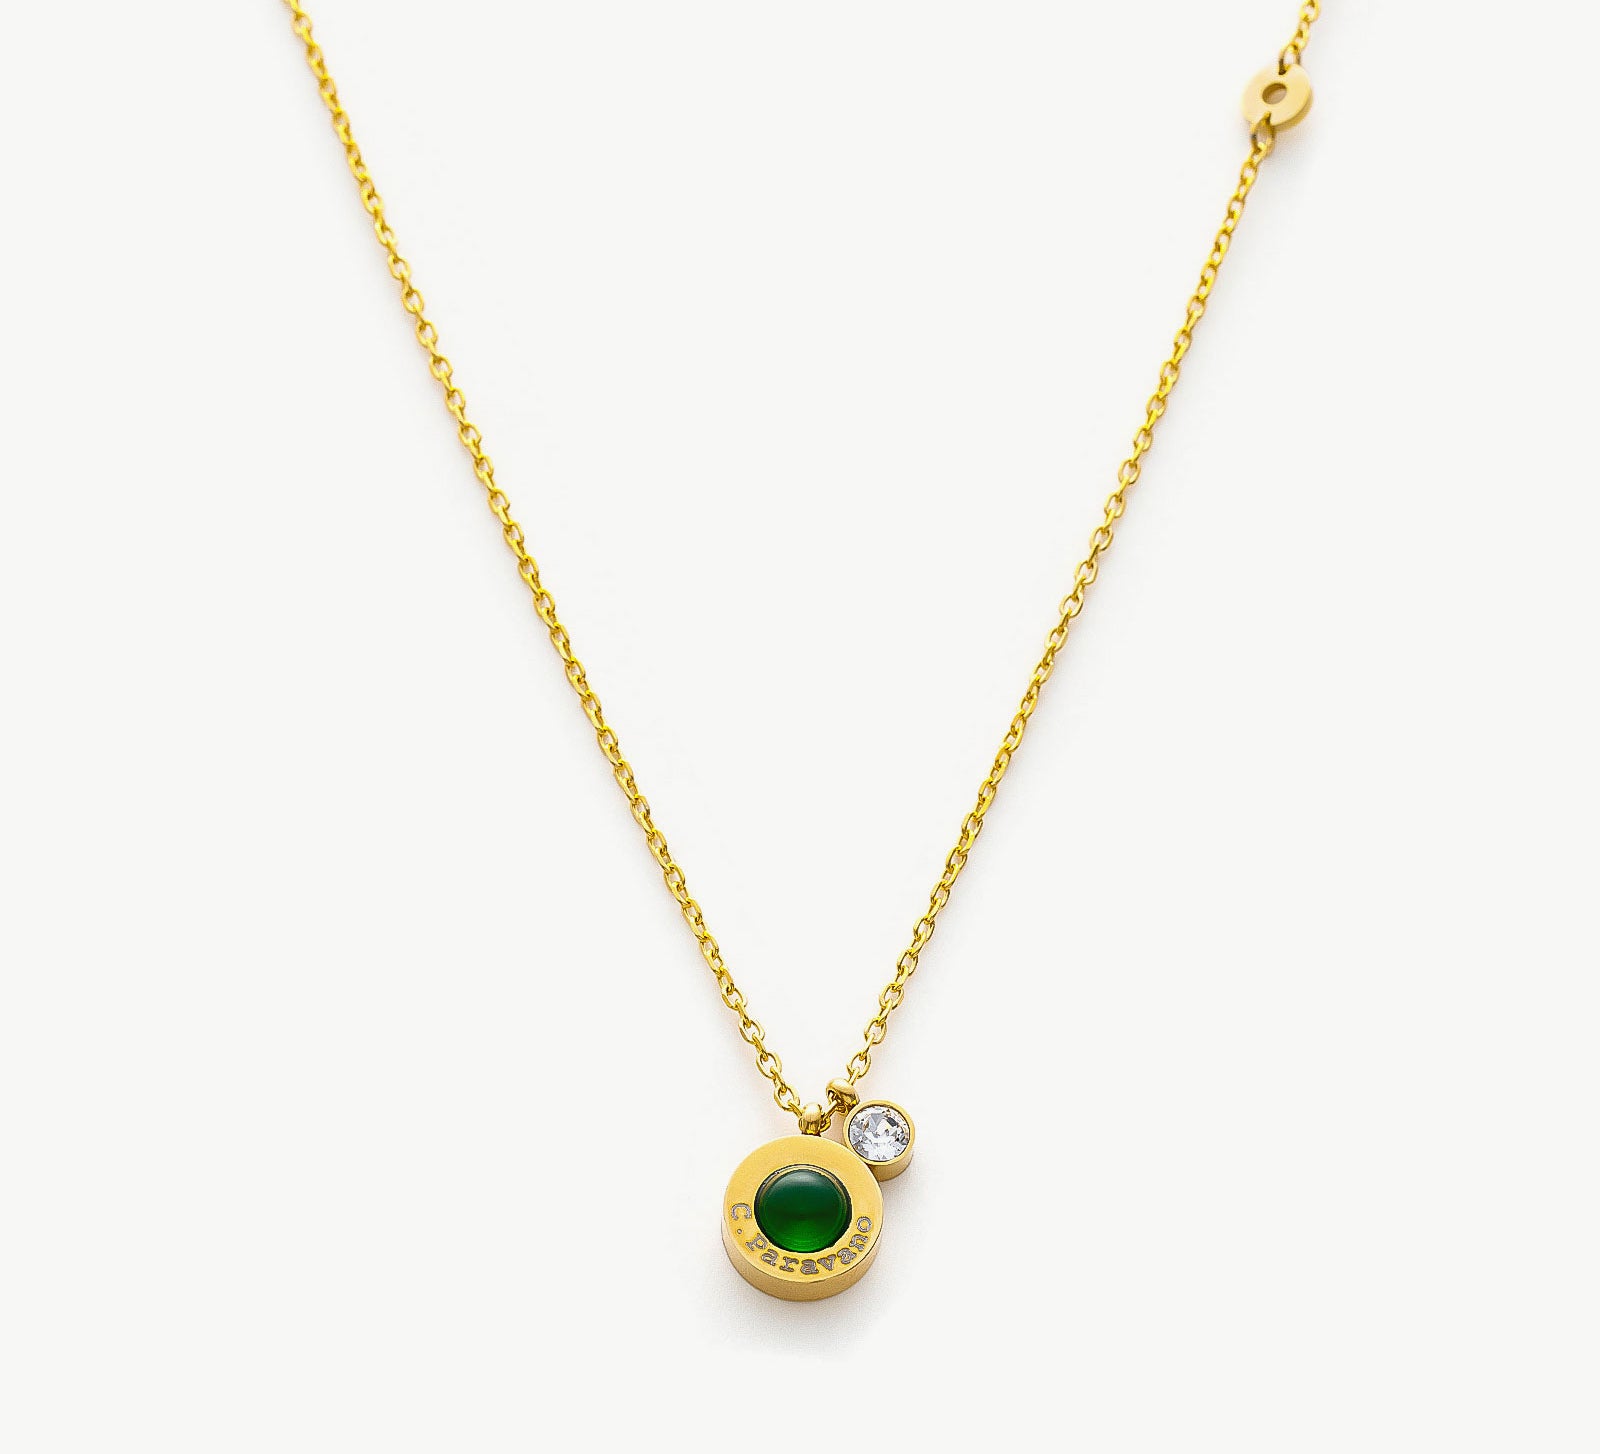 Gold Green Crystal Dew Chain Necklace, an embodiment of emerald elegance, featuring a captivating green crystal dew pendant on a delicate rose gold chain, creating a sophisticated and eye-catching accessory for special occasions.